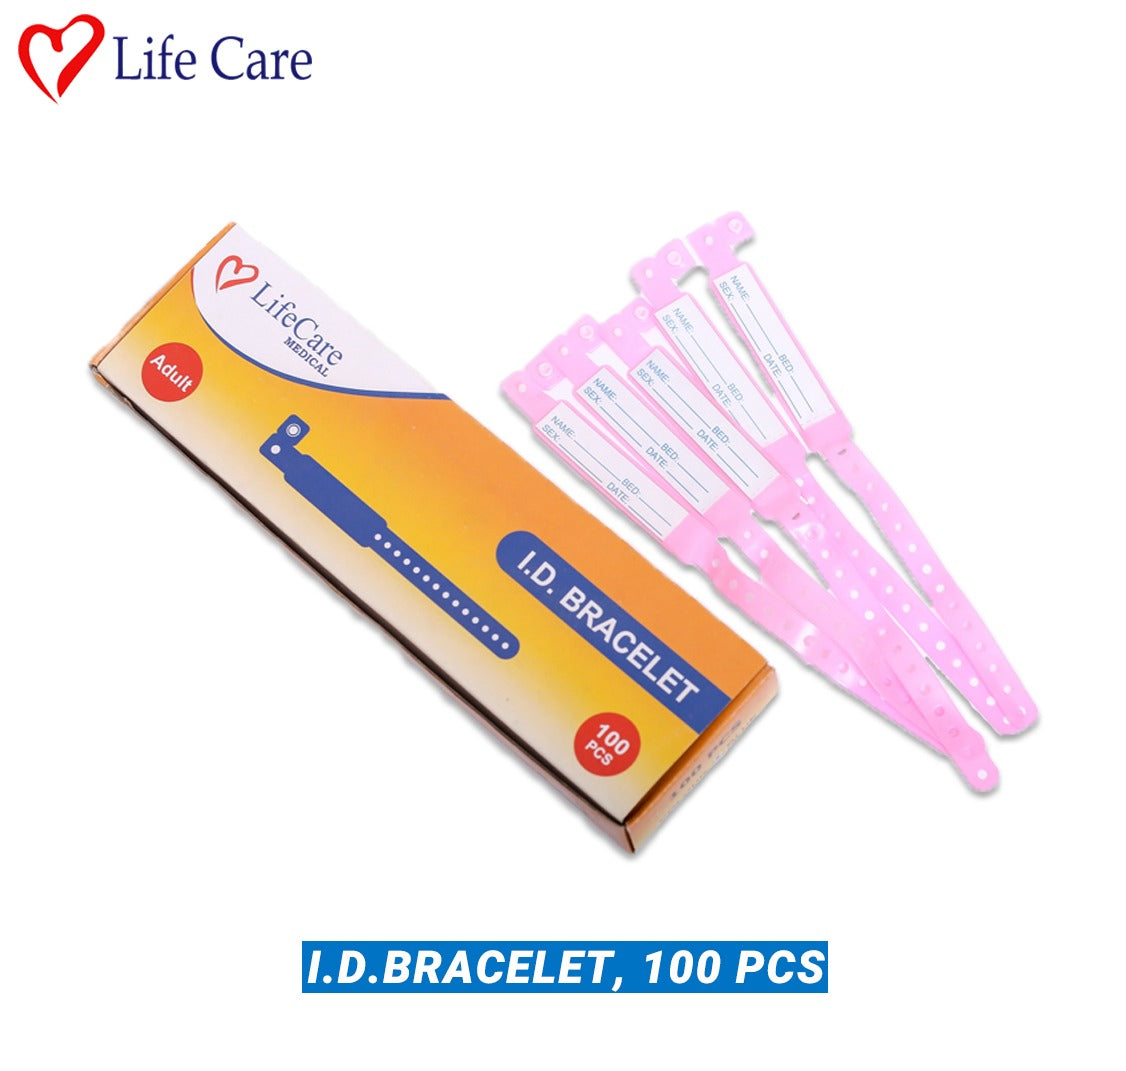 Pack Of 100 : Life Care Hospital Bracelets And Patient ID Barcode Wrist Bands